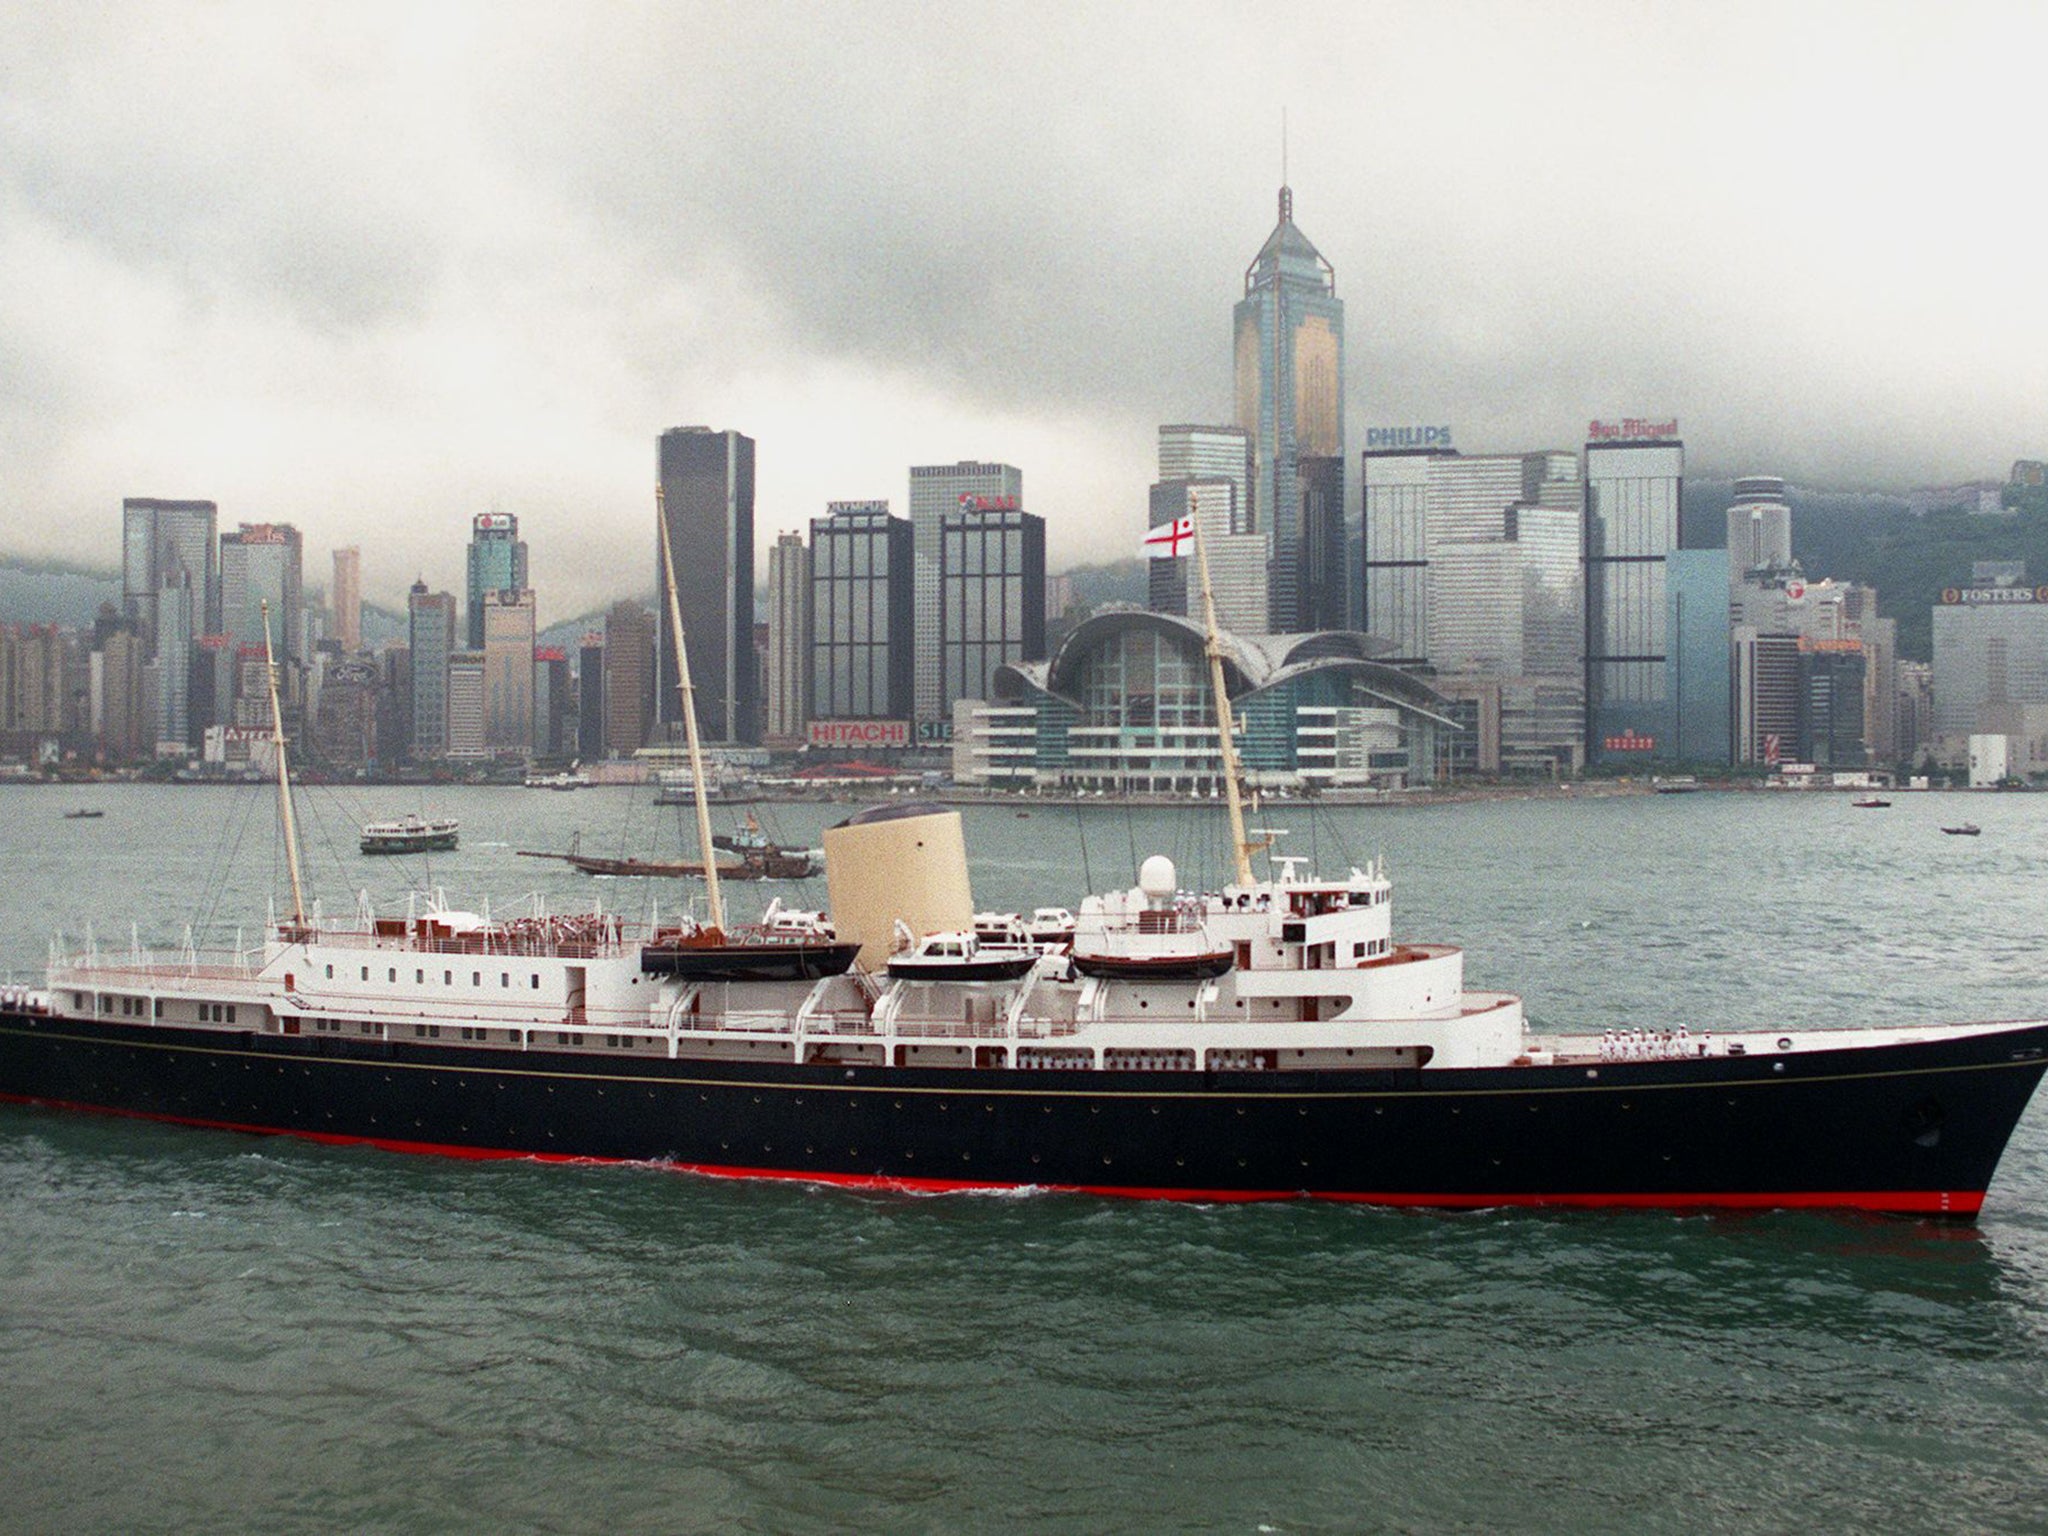 The royal yacht Britannia in Hong Kong before it was decommissioned in 1997